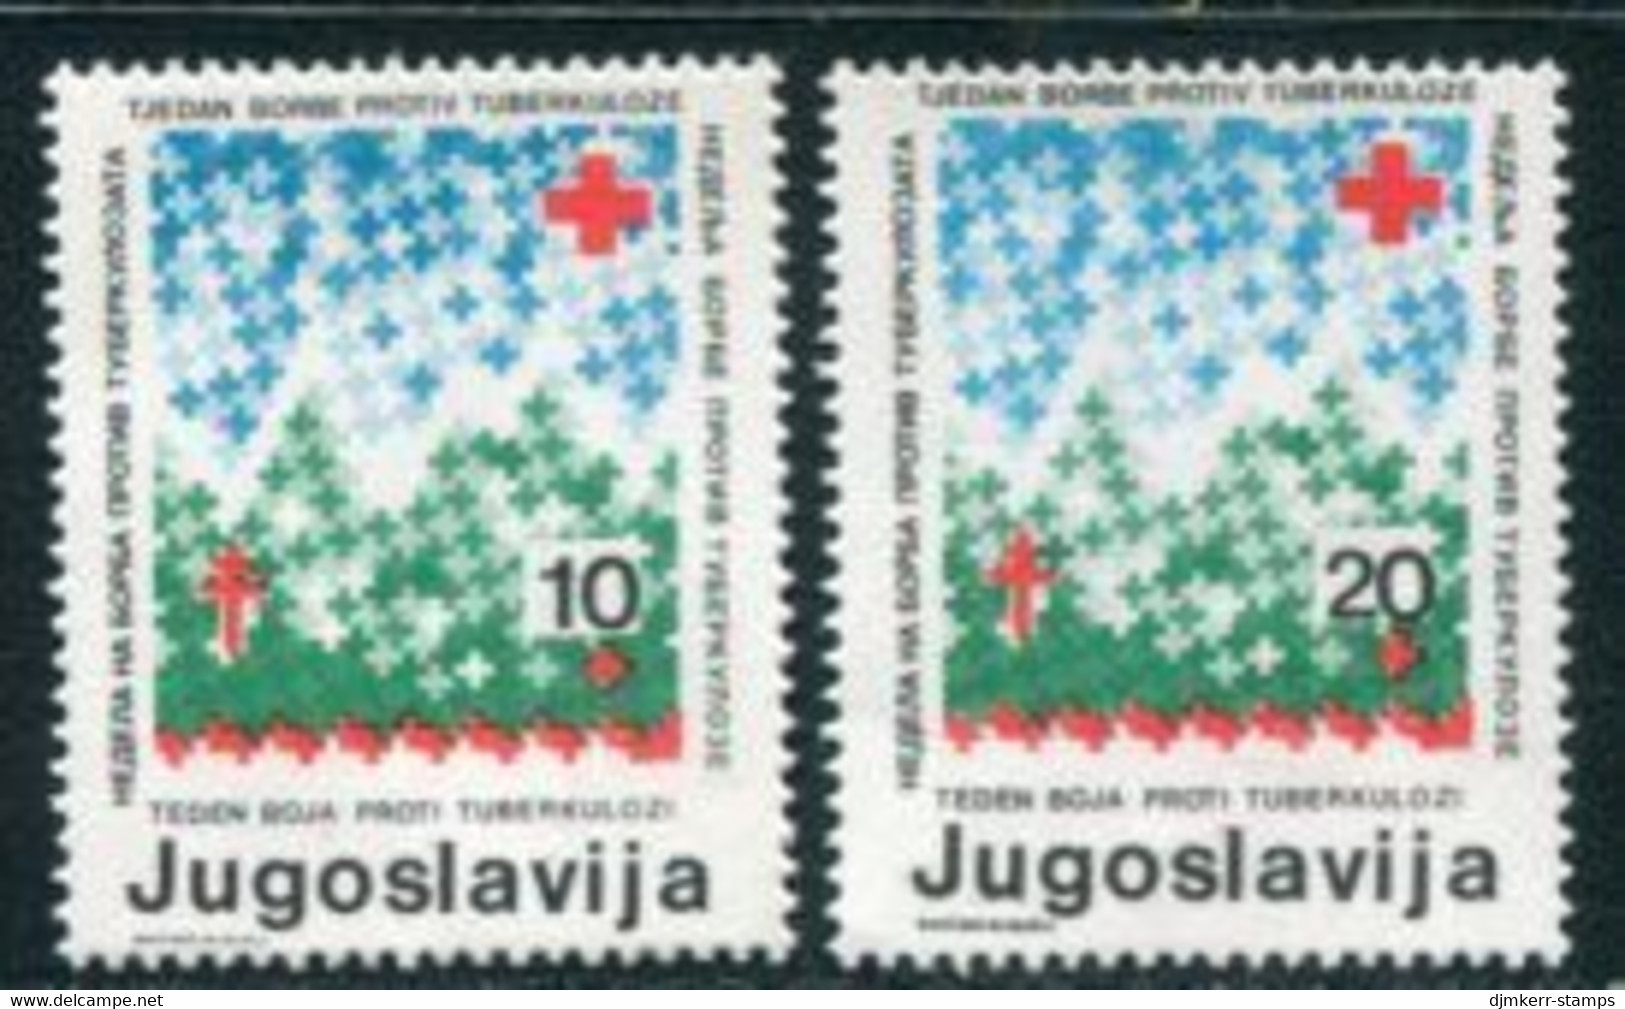 YUGOSLAVIA 1986 Red Cross Anti-Tuberculosis Tax 10, 20 D. Perforated 13¼:13½ MNH / **. Michel ZZM 119C, 122C - Charity Issues